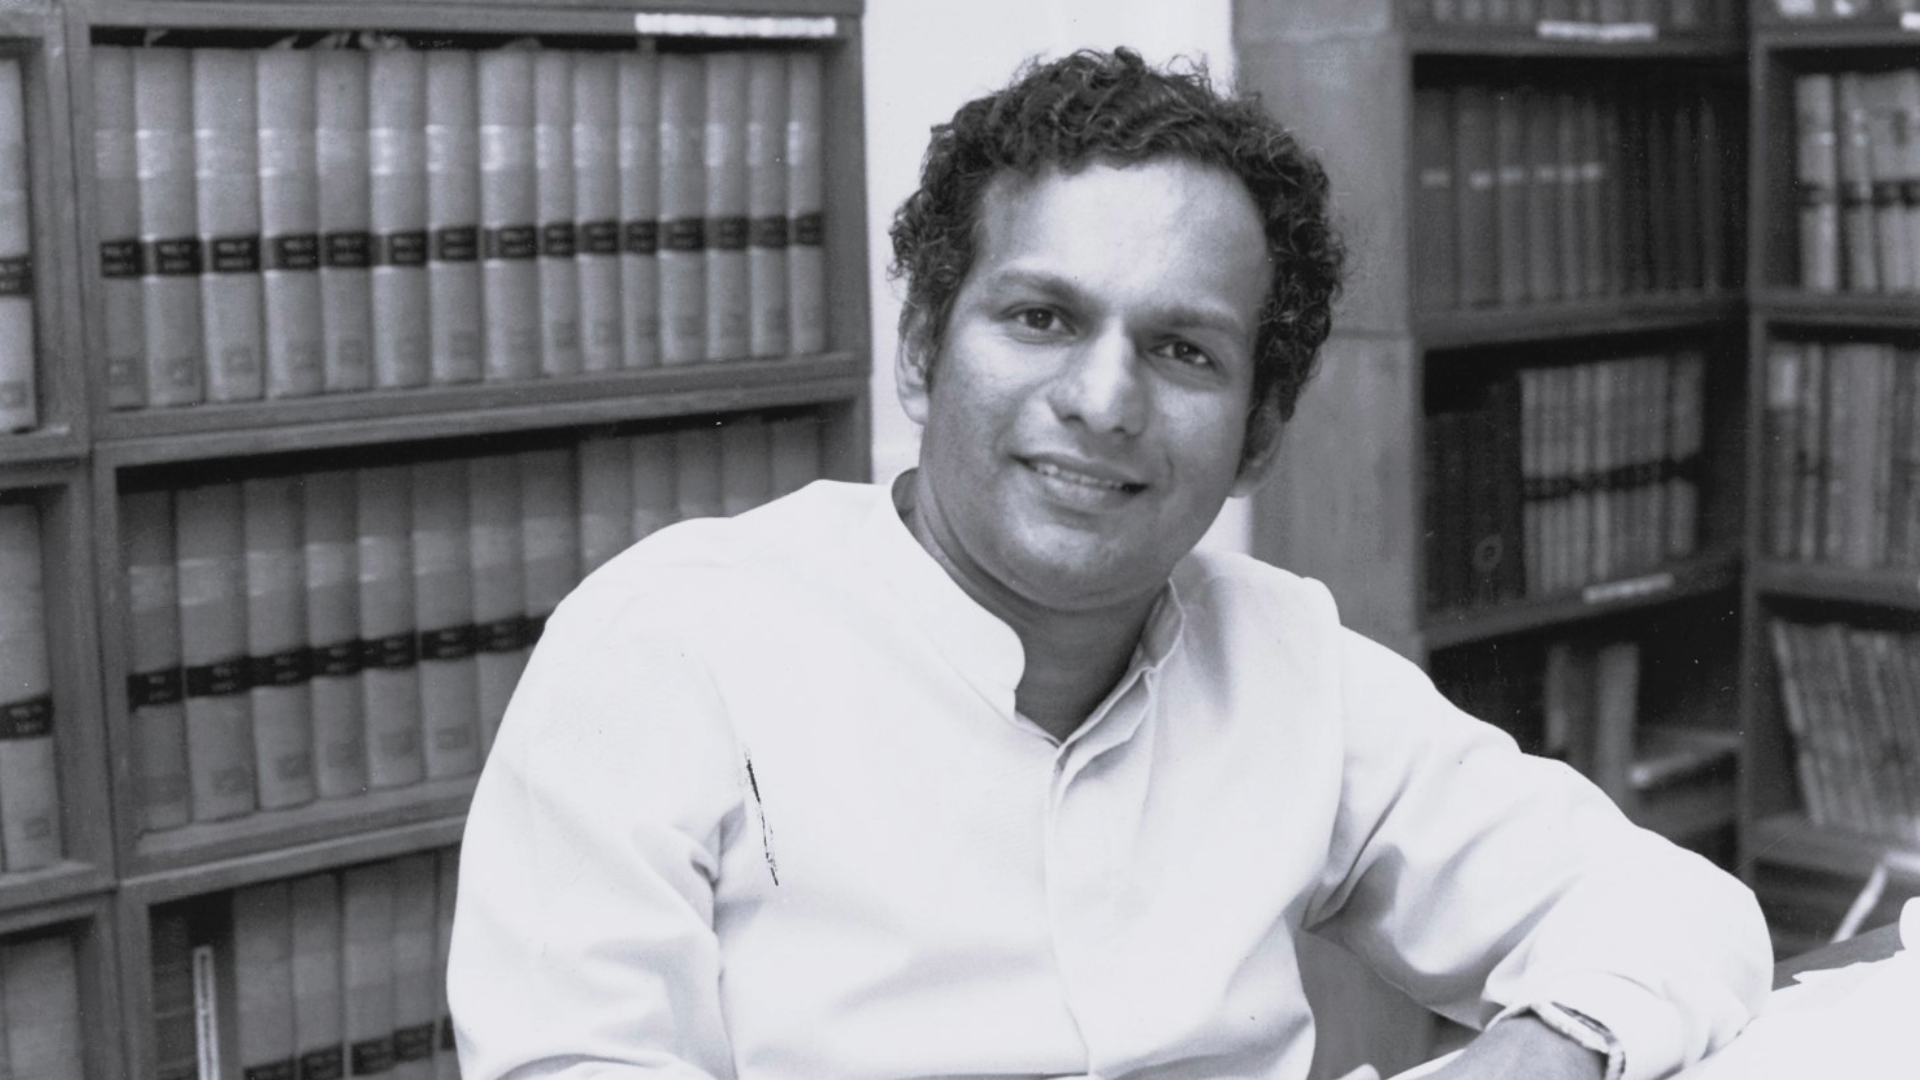 Black and white photo of Neelan Tiruchelvam sitting at a desk in front of book shelves smiling at the camera.